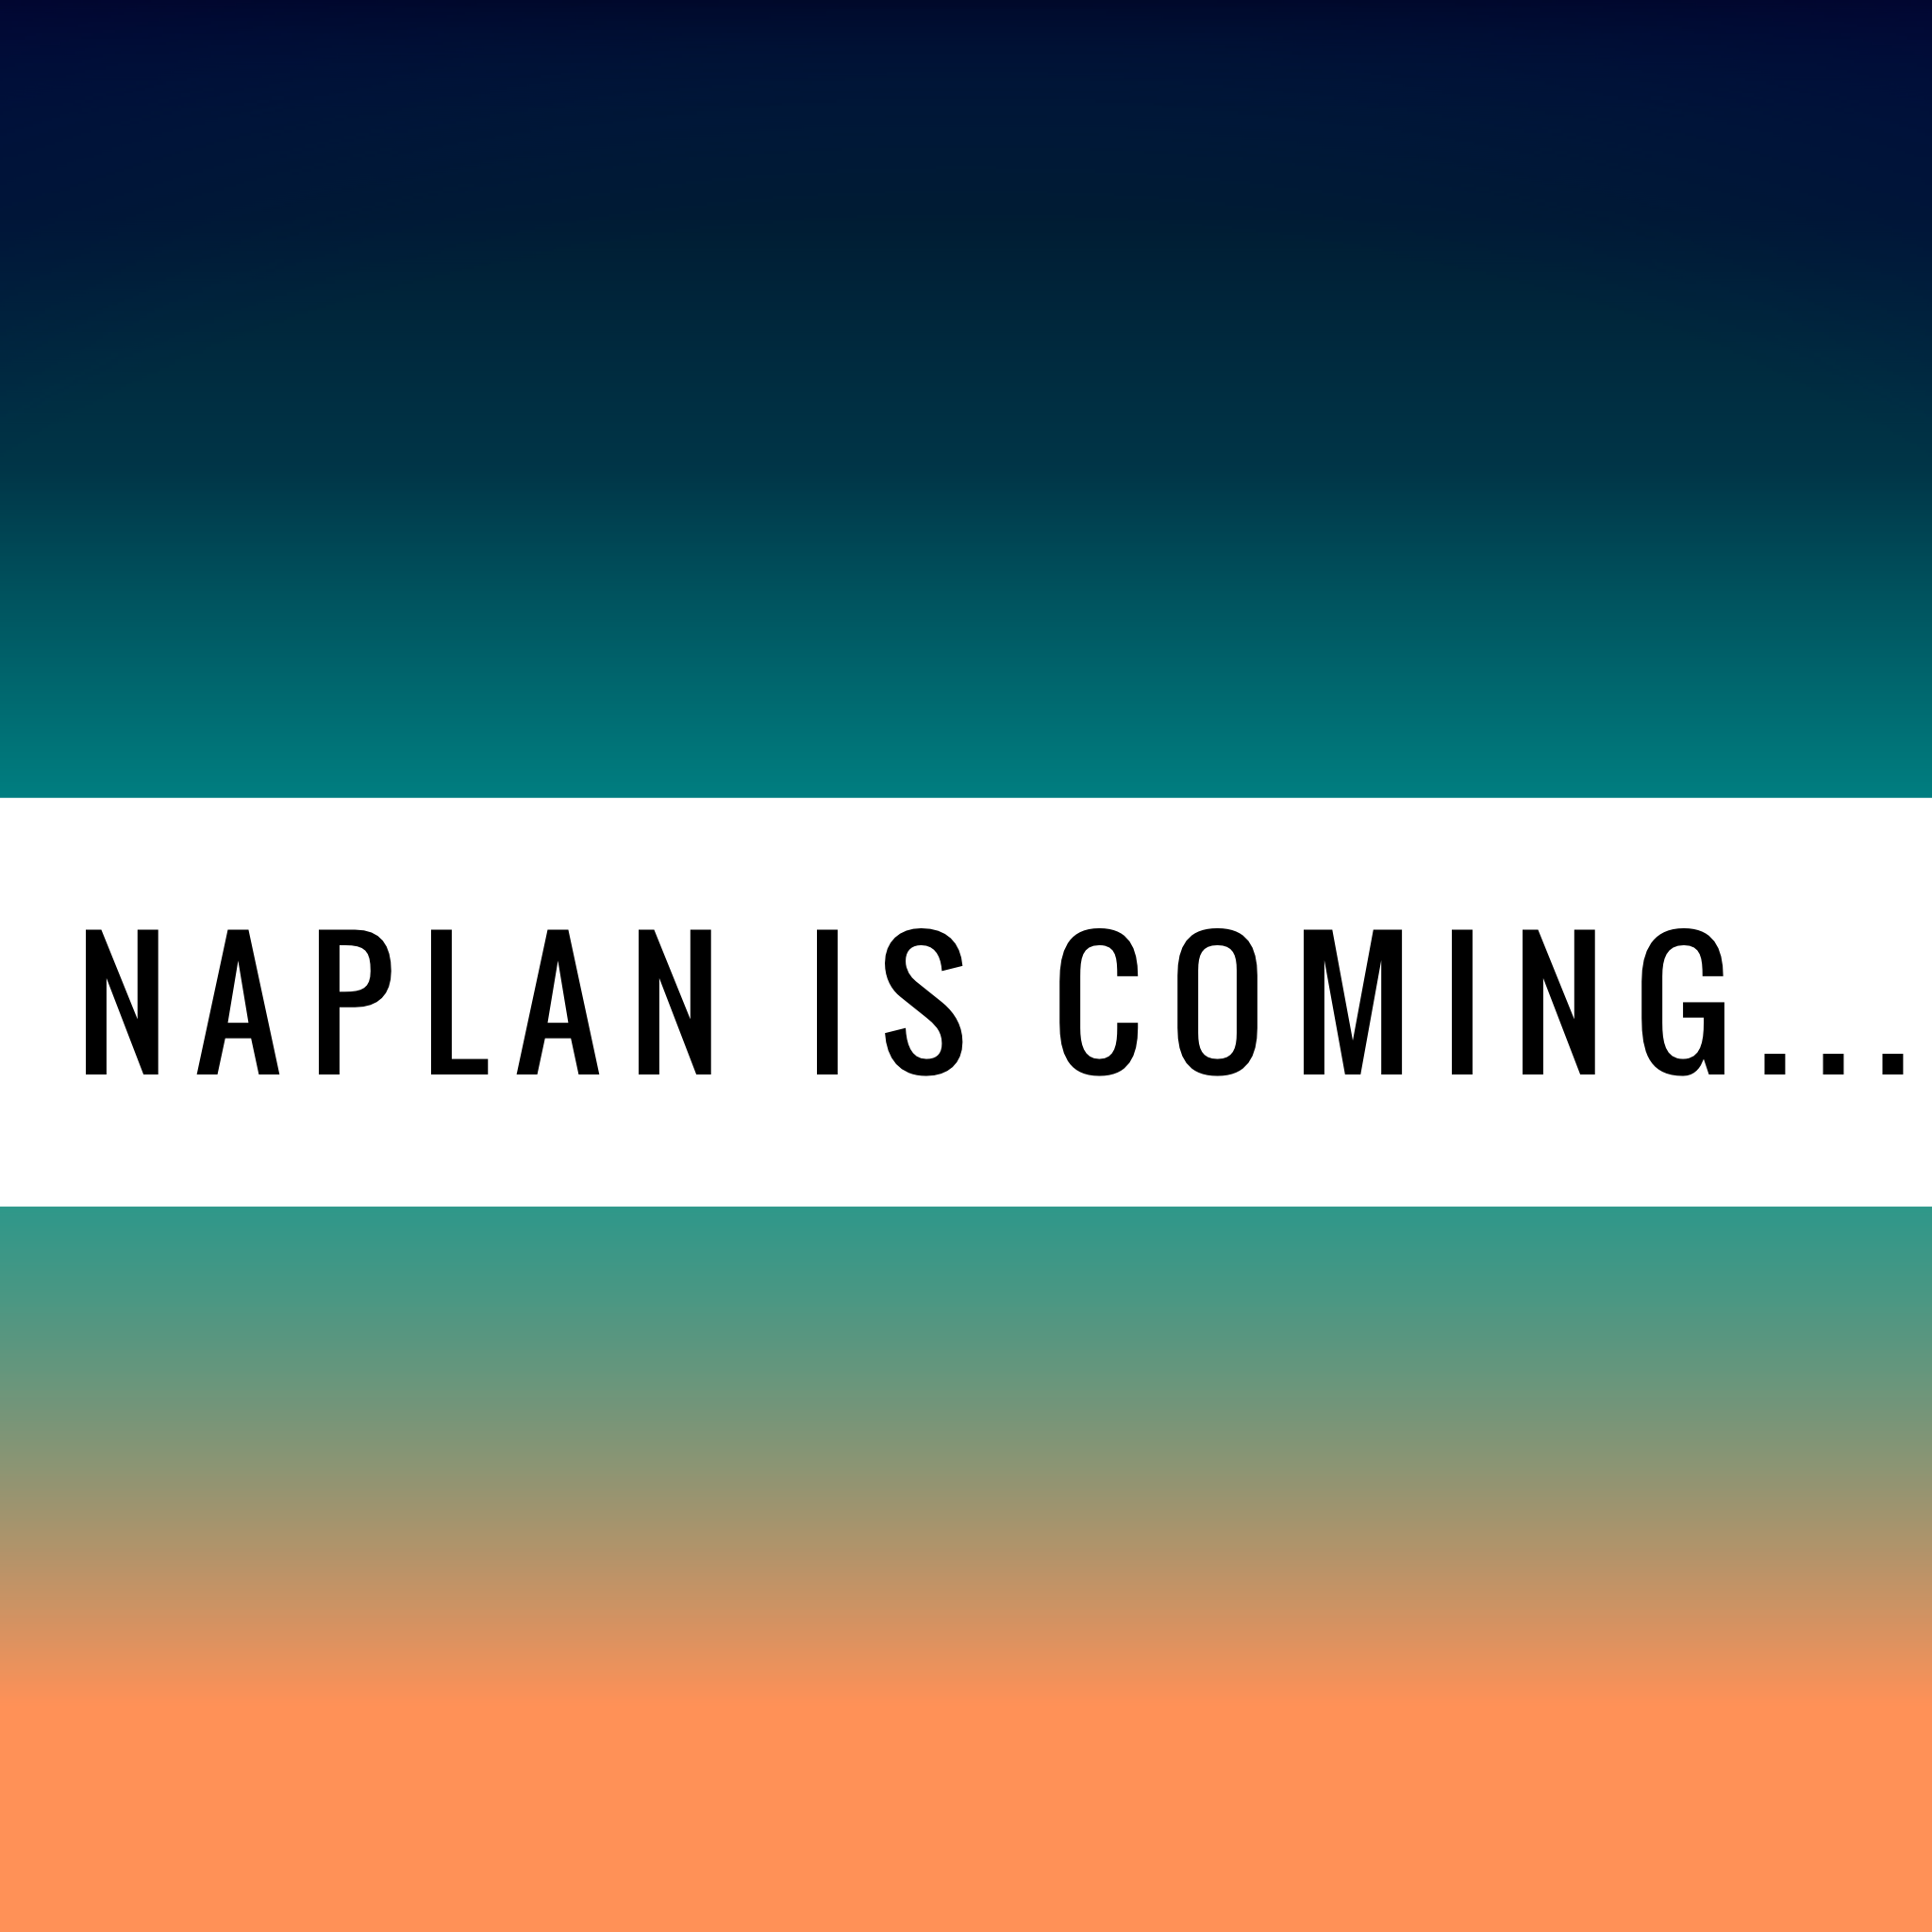 NAPLAN is coming…